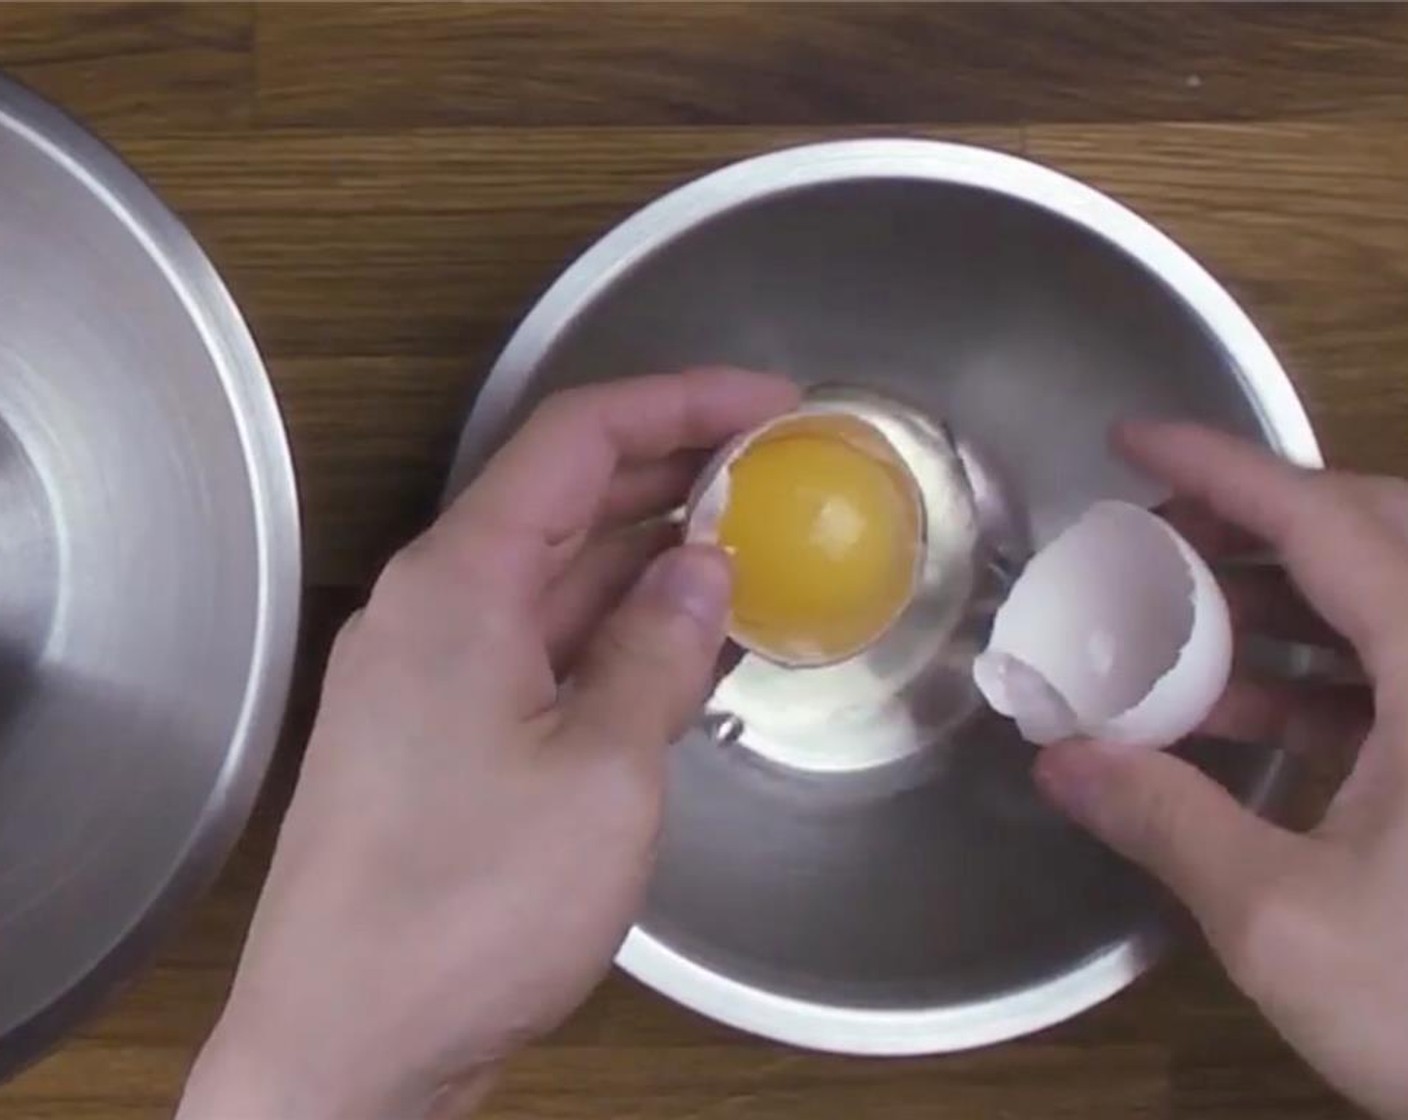 step 3 Crack an extra Farmhouse Eggs® Large Brown Egg (1) and carefully separate the egg whites from the yolk. Pour the egg whites into a small mixing bowl and the egg yolk in a medium mixing bowl.